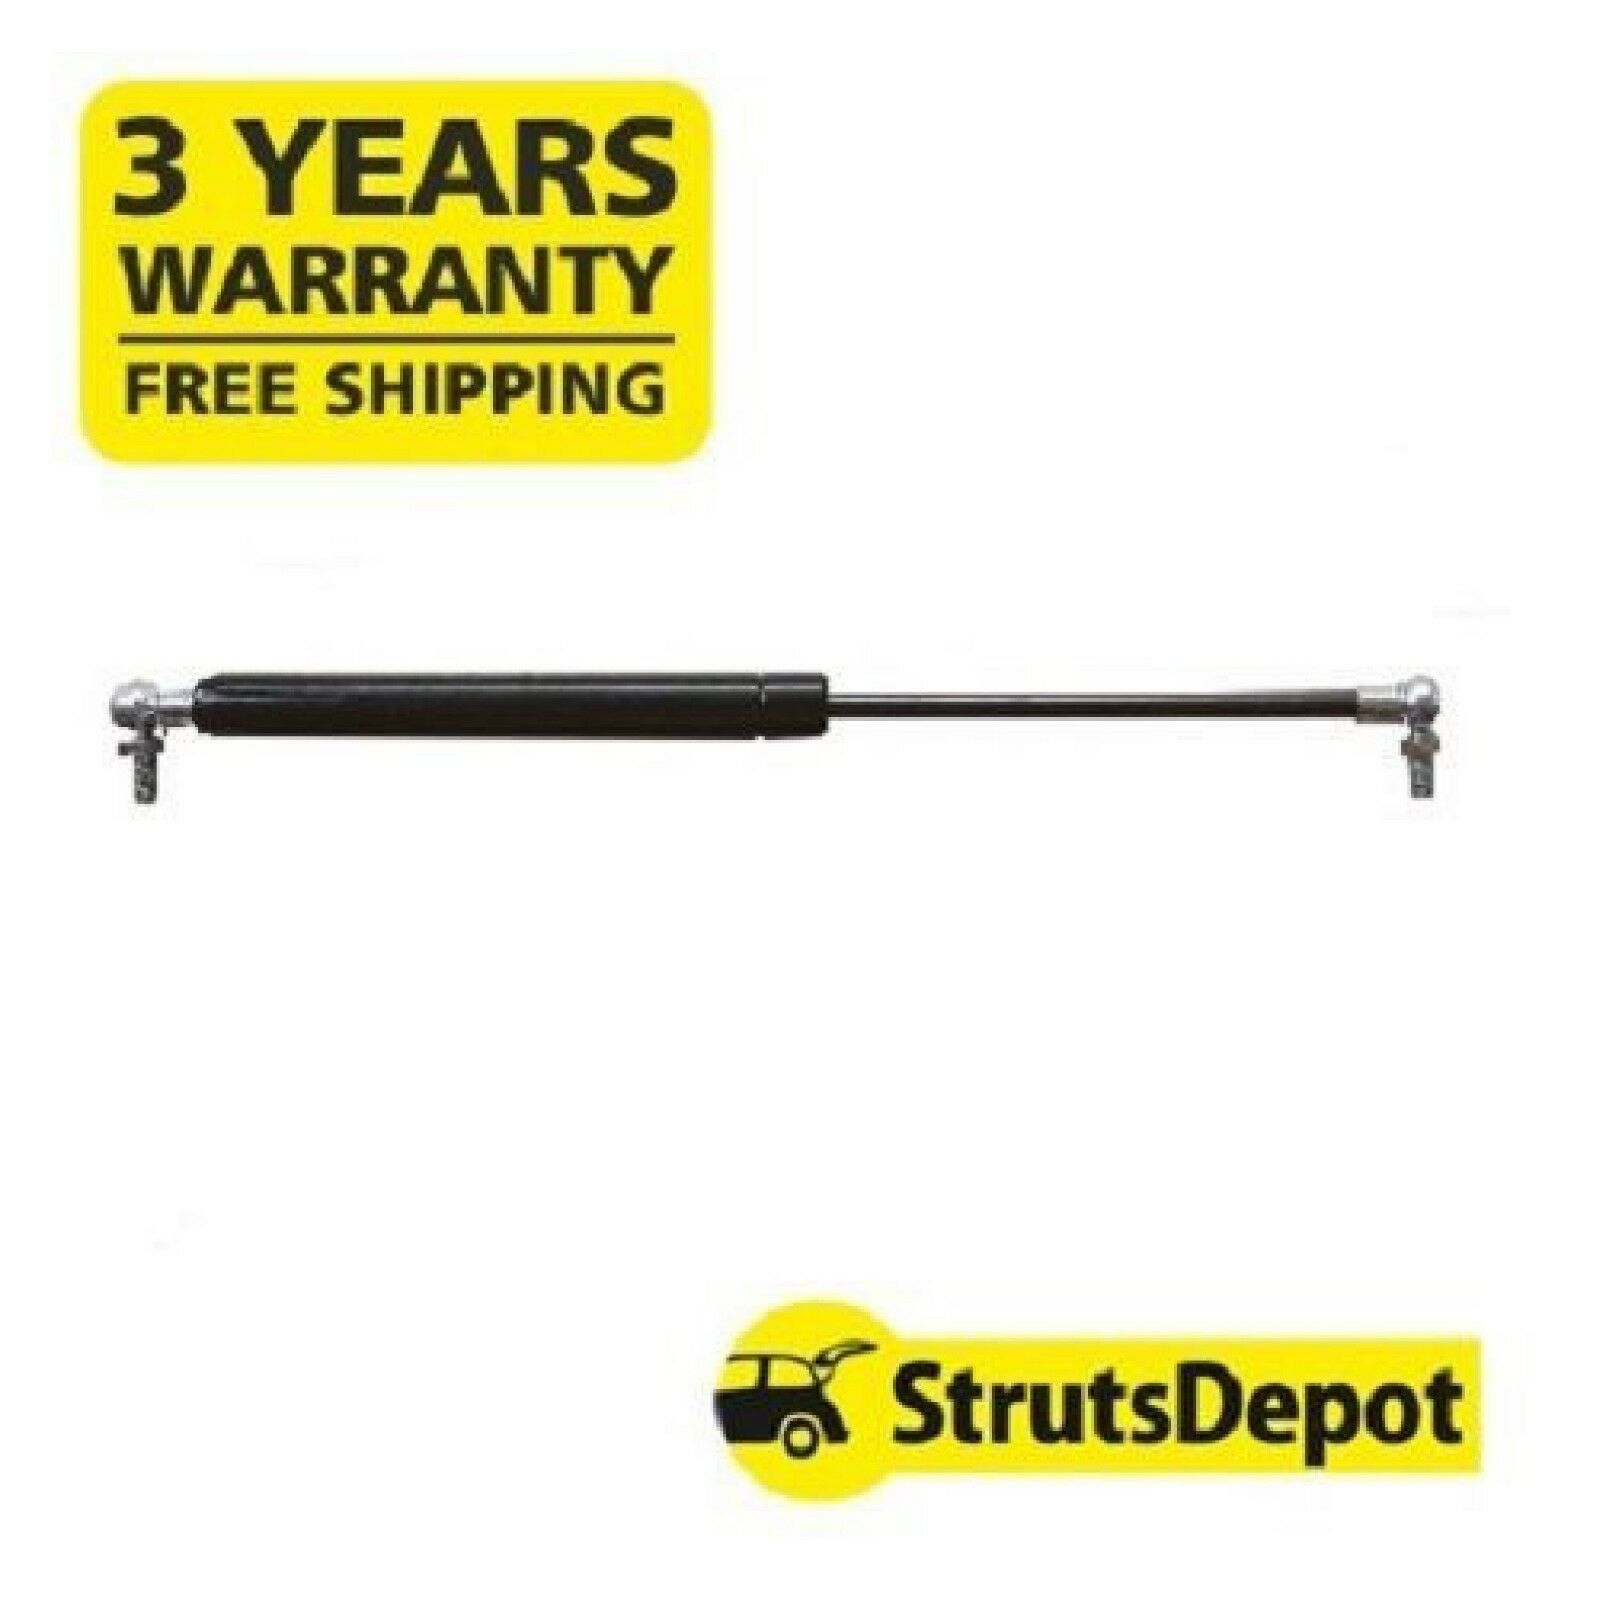 Replacement Gas Strut for Horse Trailer Ramps 2100N